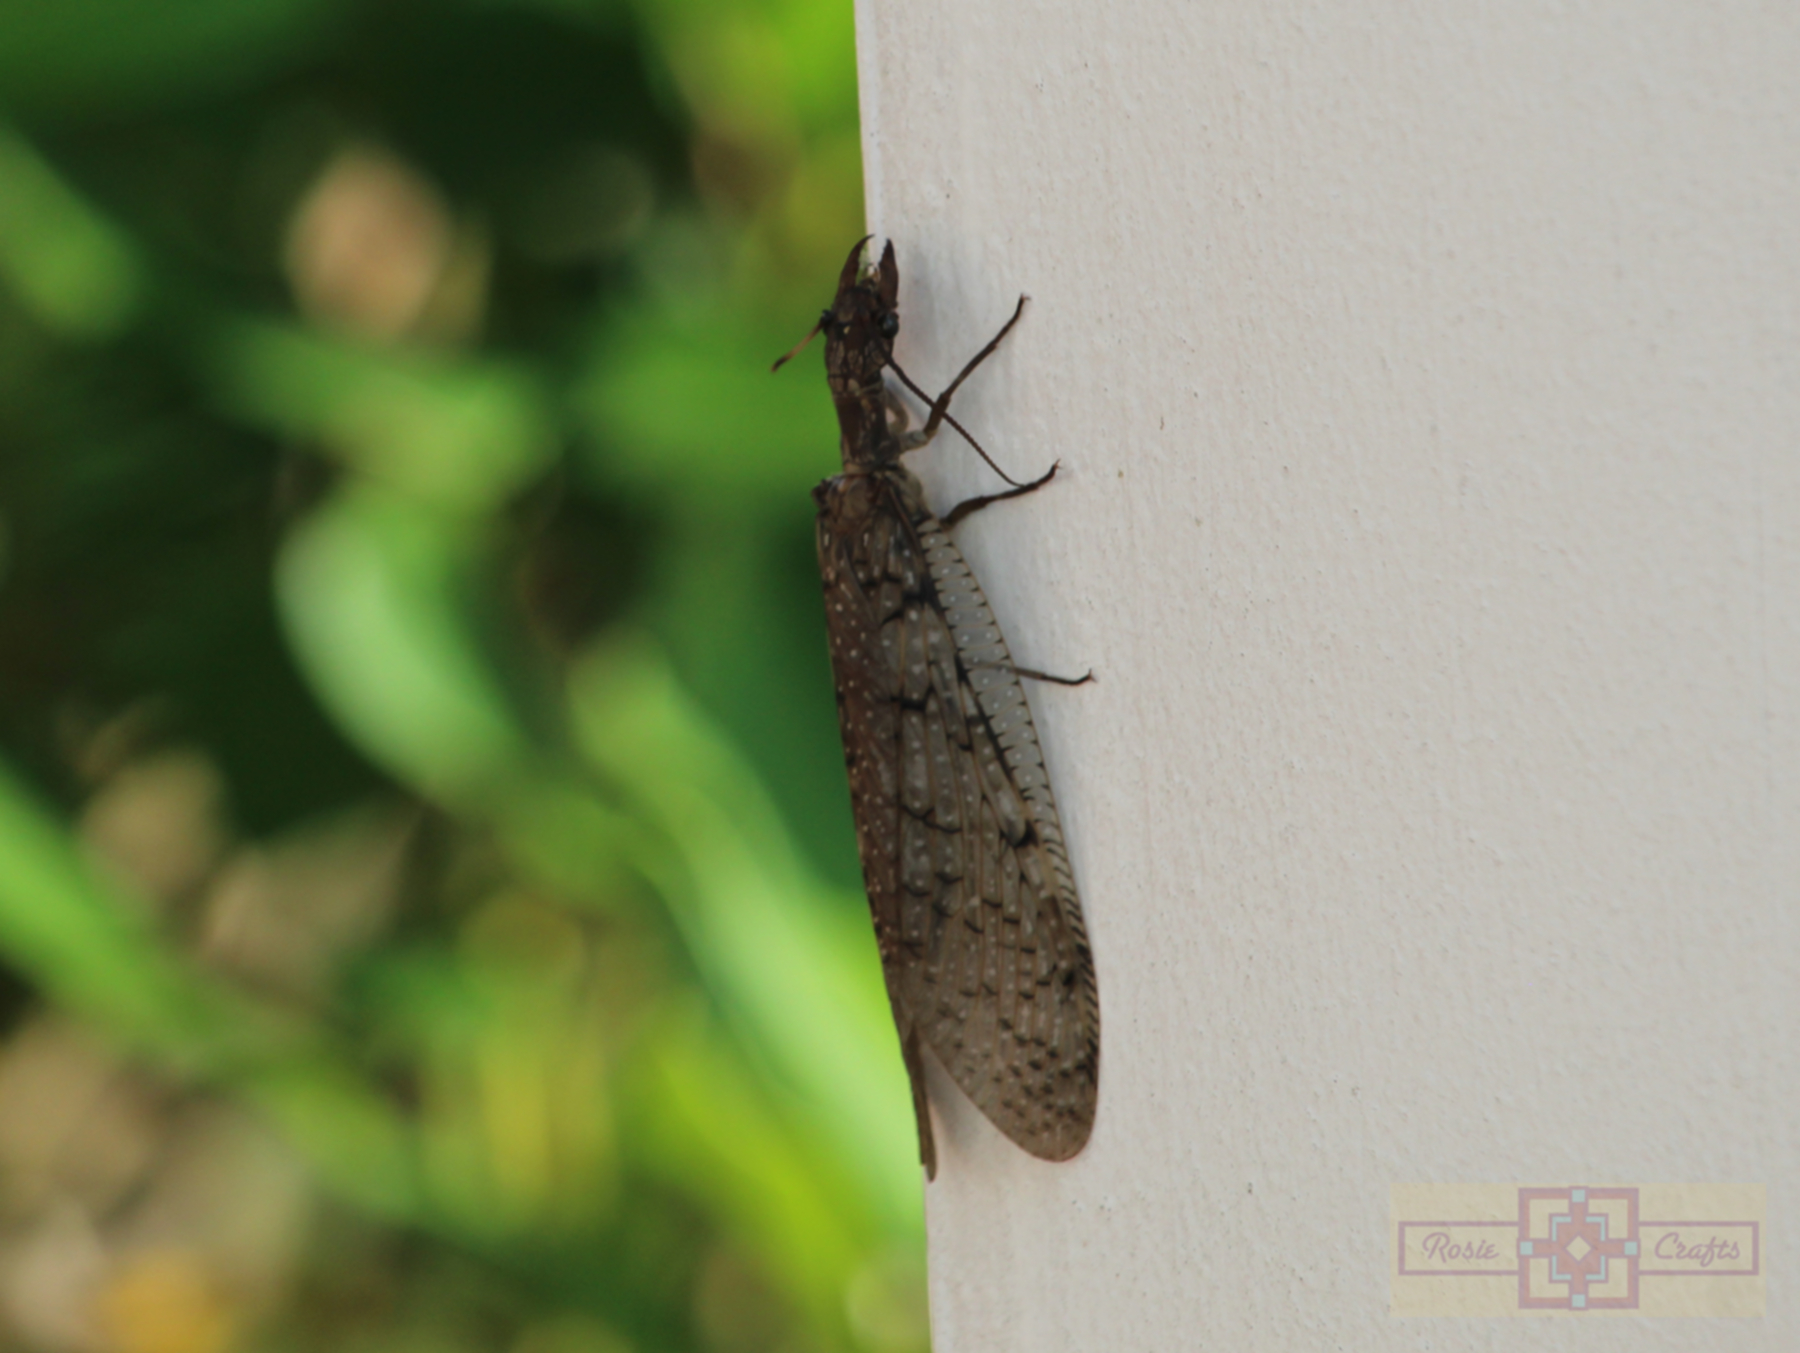 Rosie Crafts Dobsonfly Insect Photography